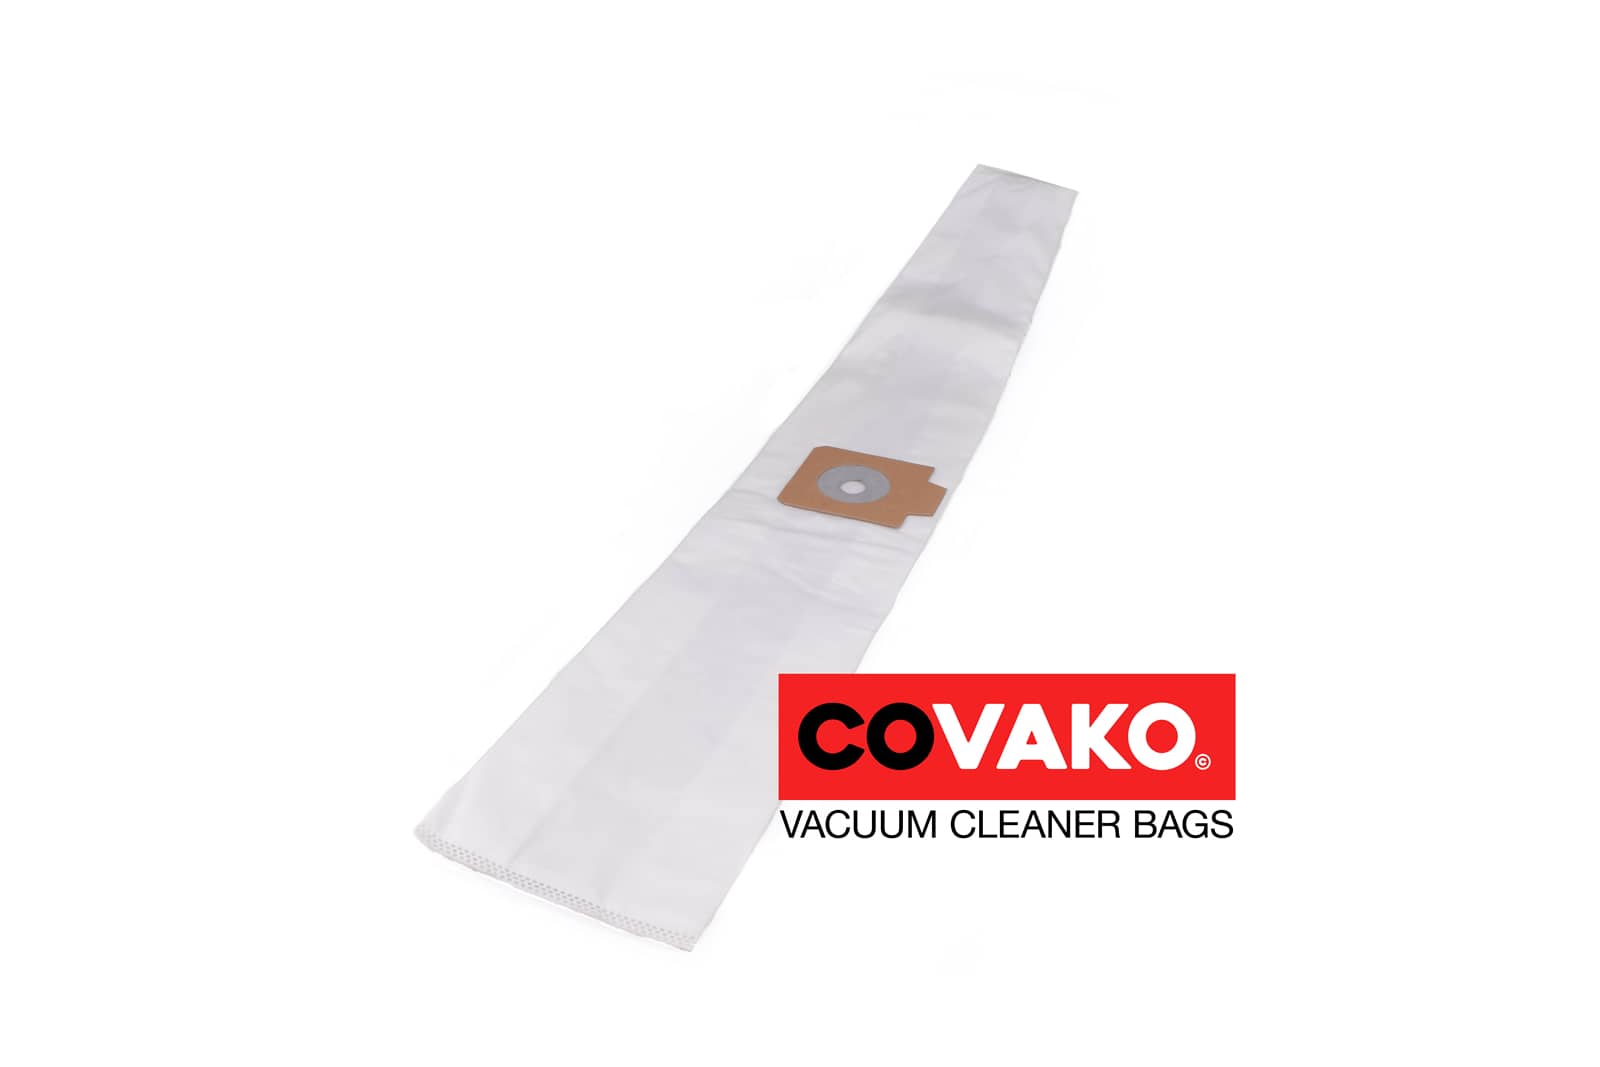 Oehme Otto GS 20 / Synthesis - Oehme Otto vacuum cleaner bags